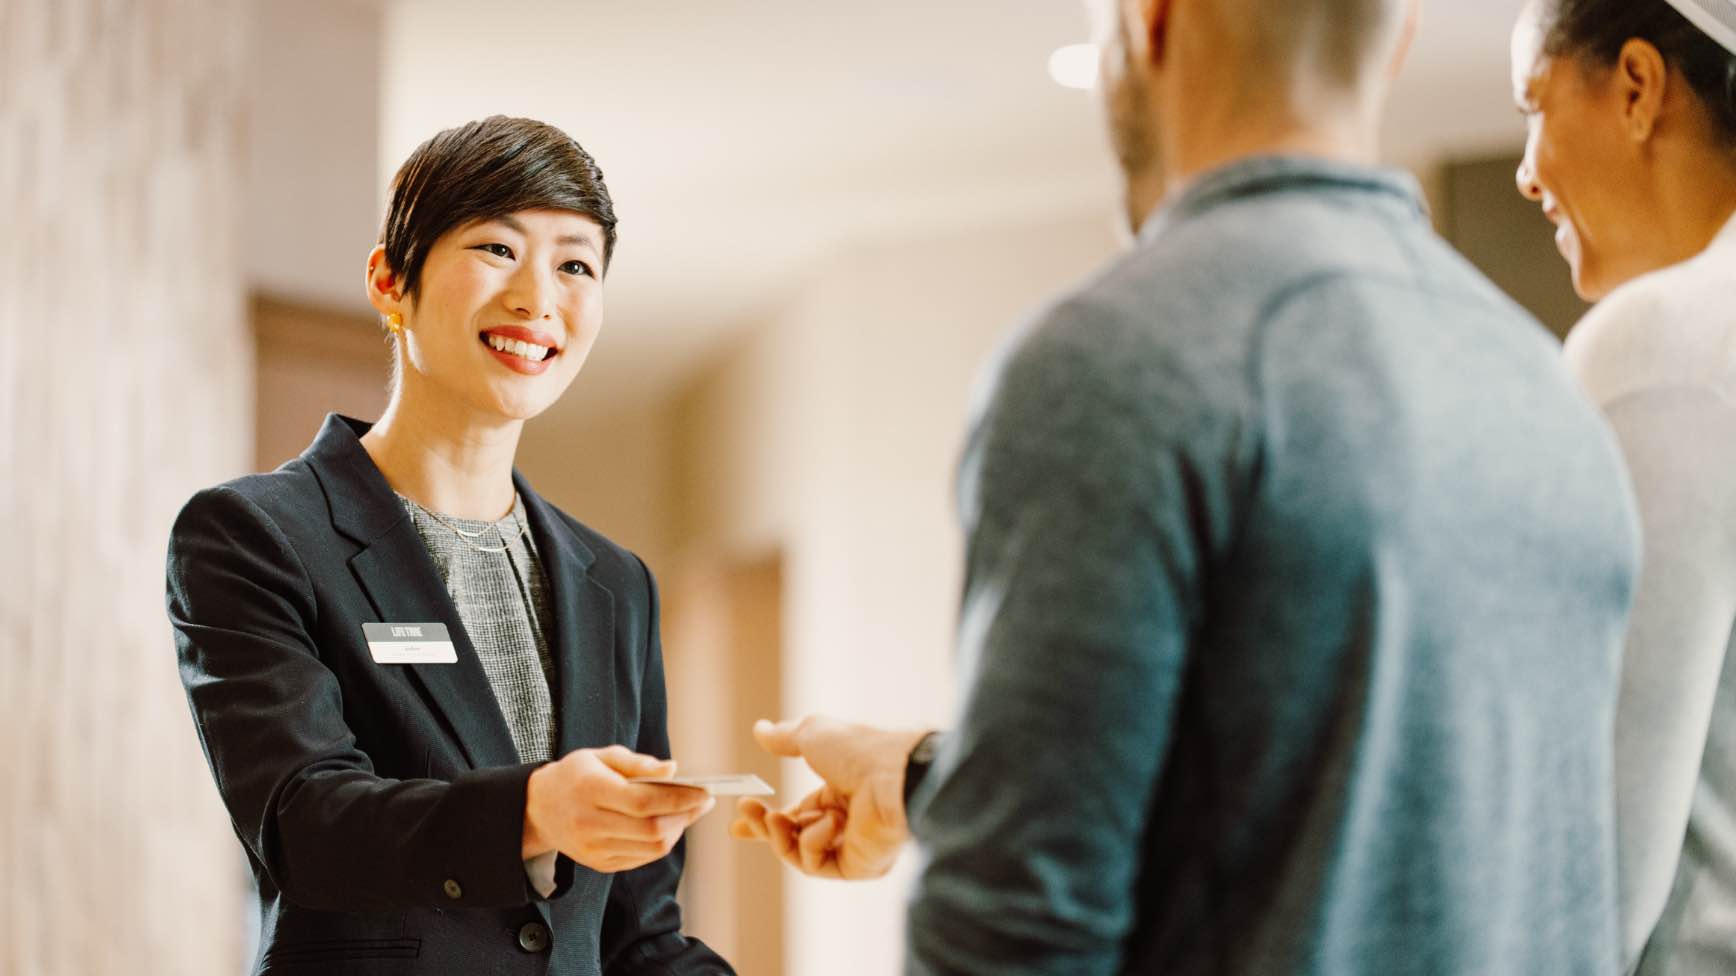 Image of woman handing a business card to a man.